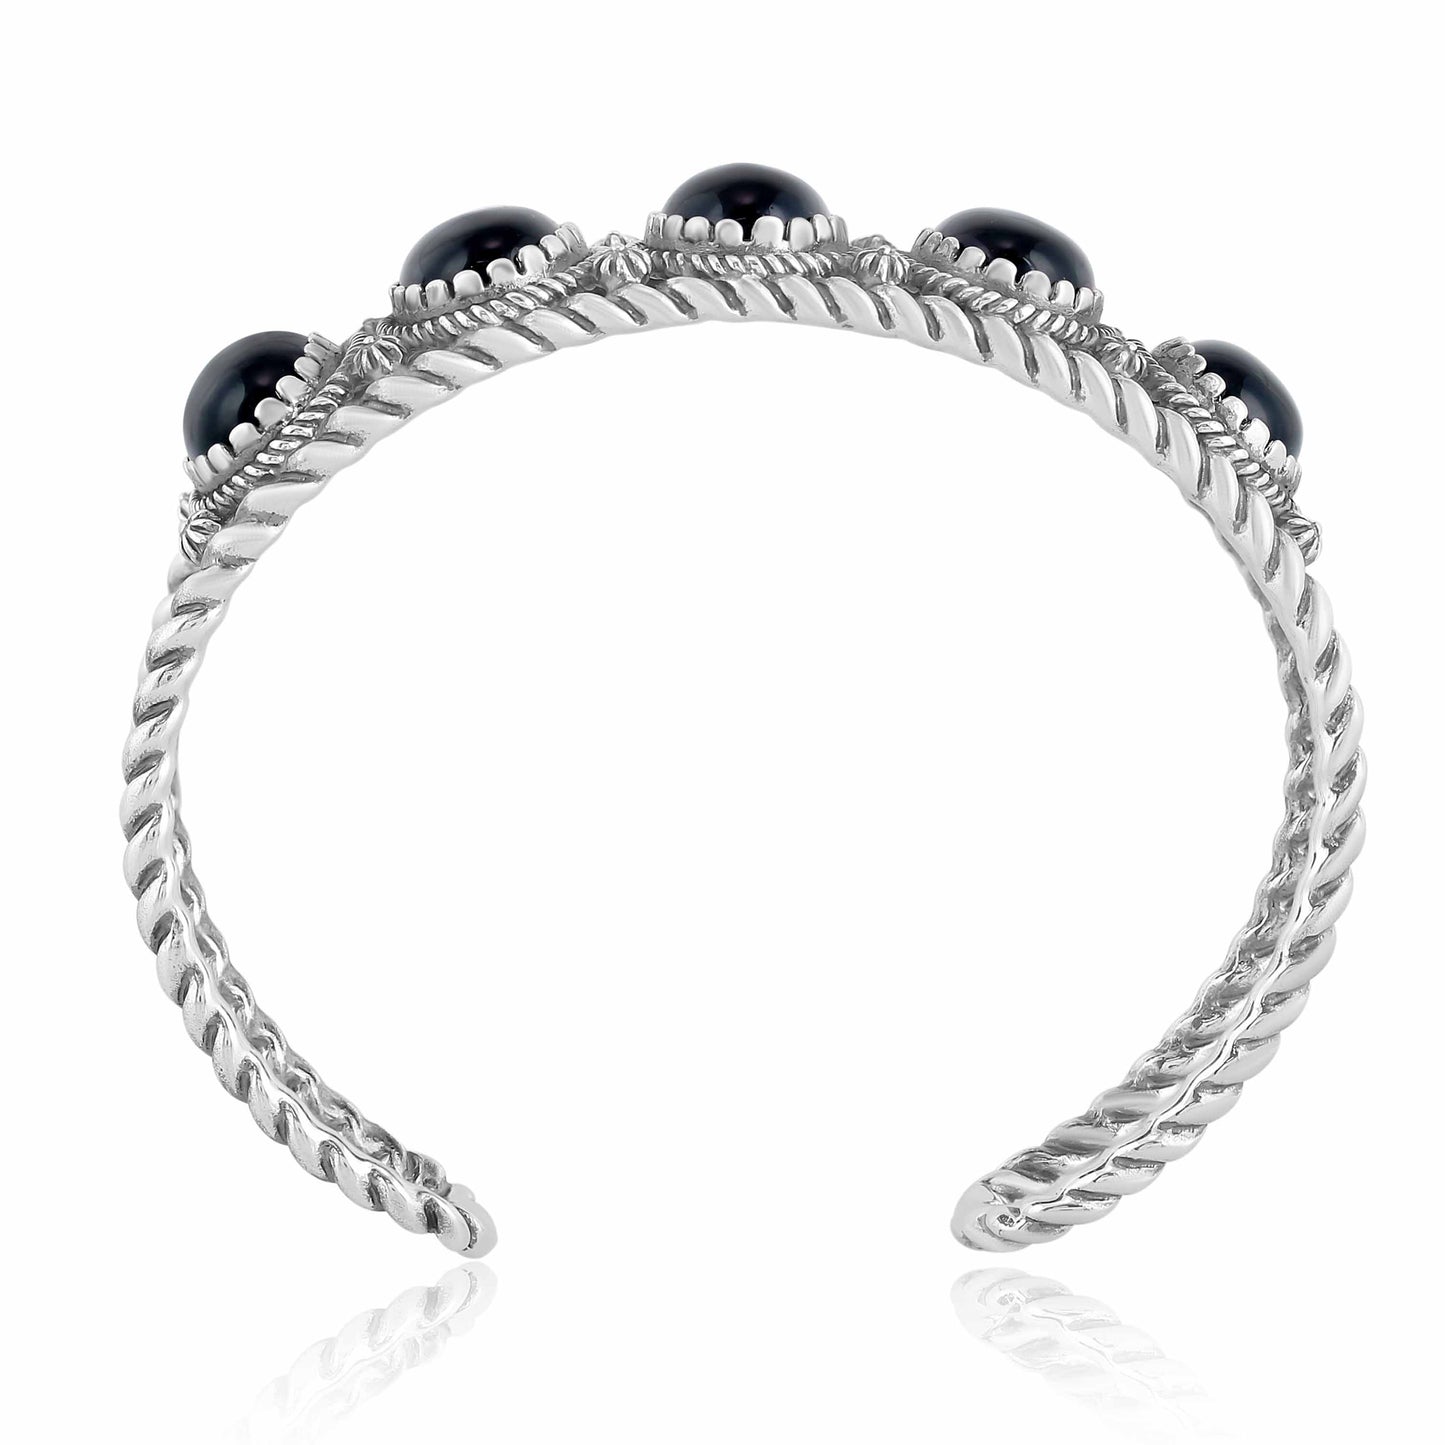 Sterling Silver with Black Agate Gemstone Rope Design Women's Cuff Bracelet, Size Small - Large